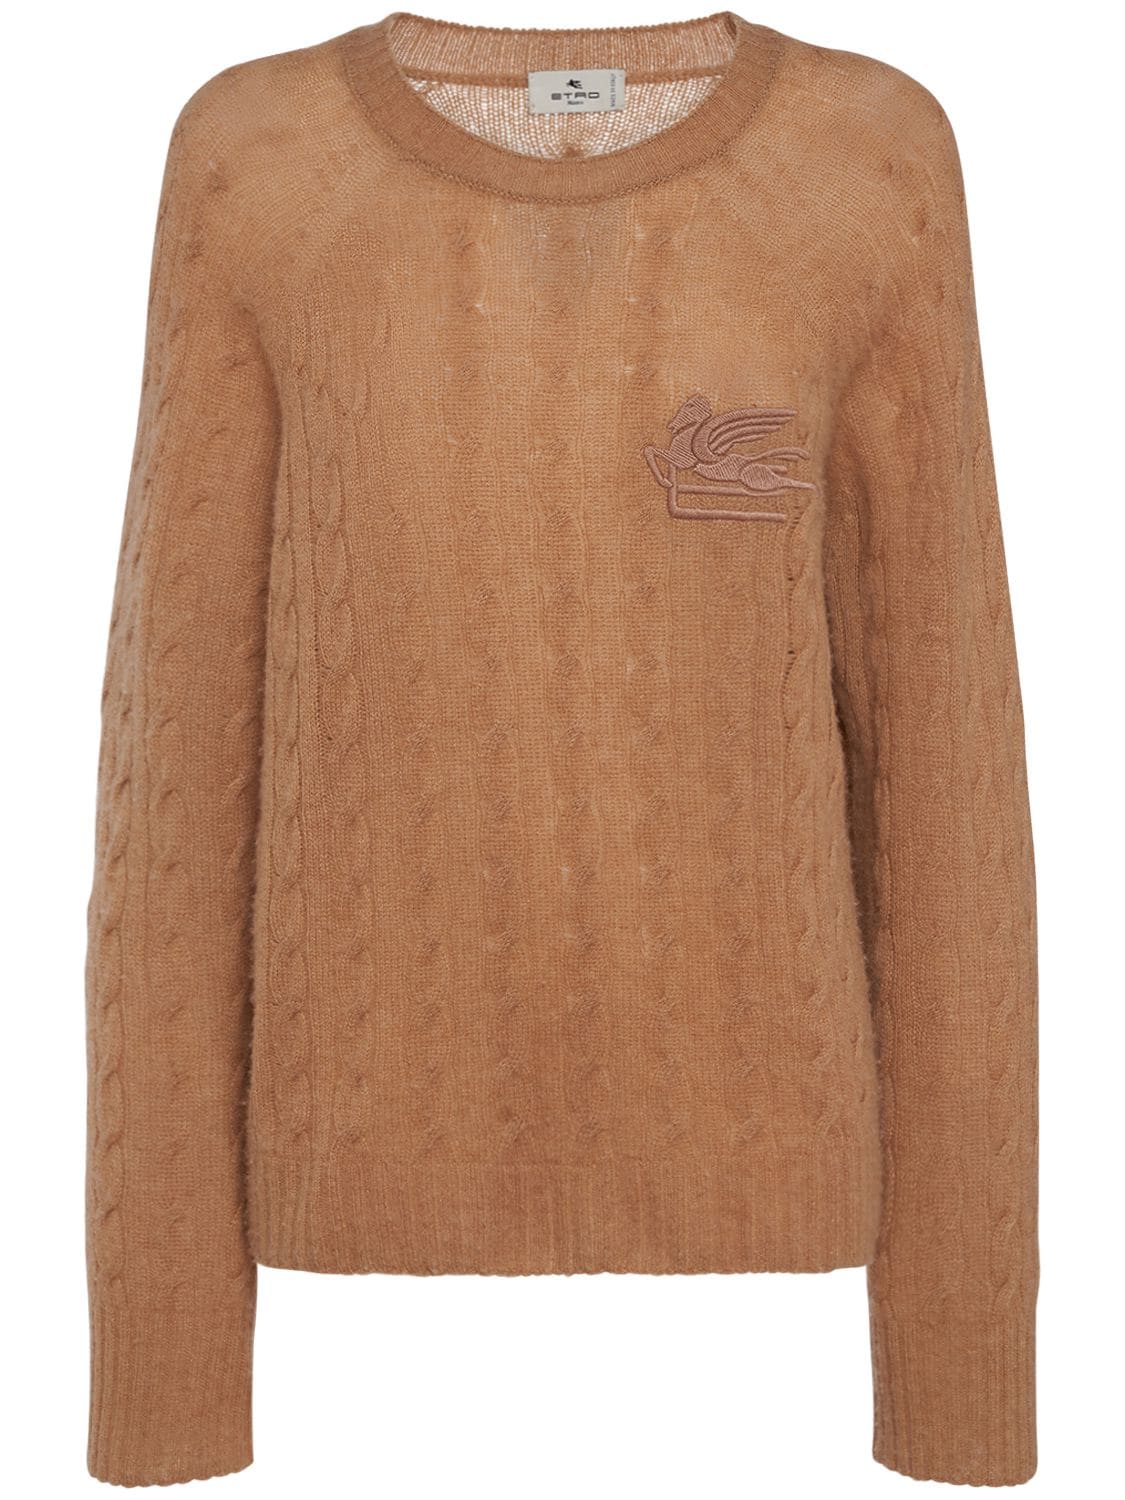 Image of Cashmere Cable Knit Sweater